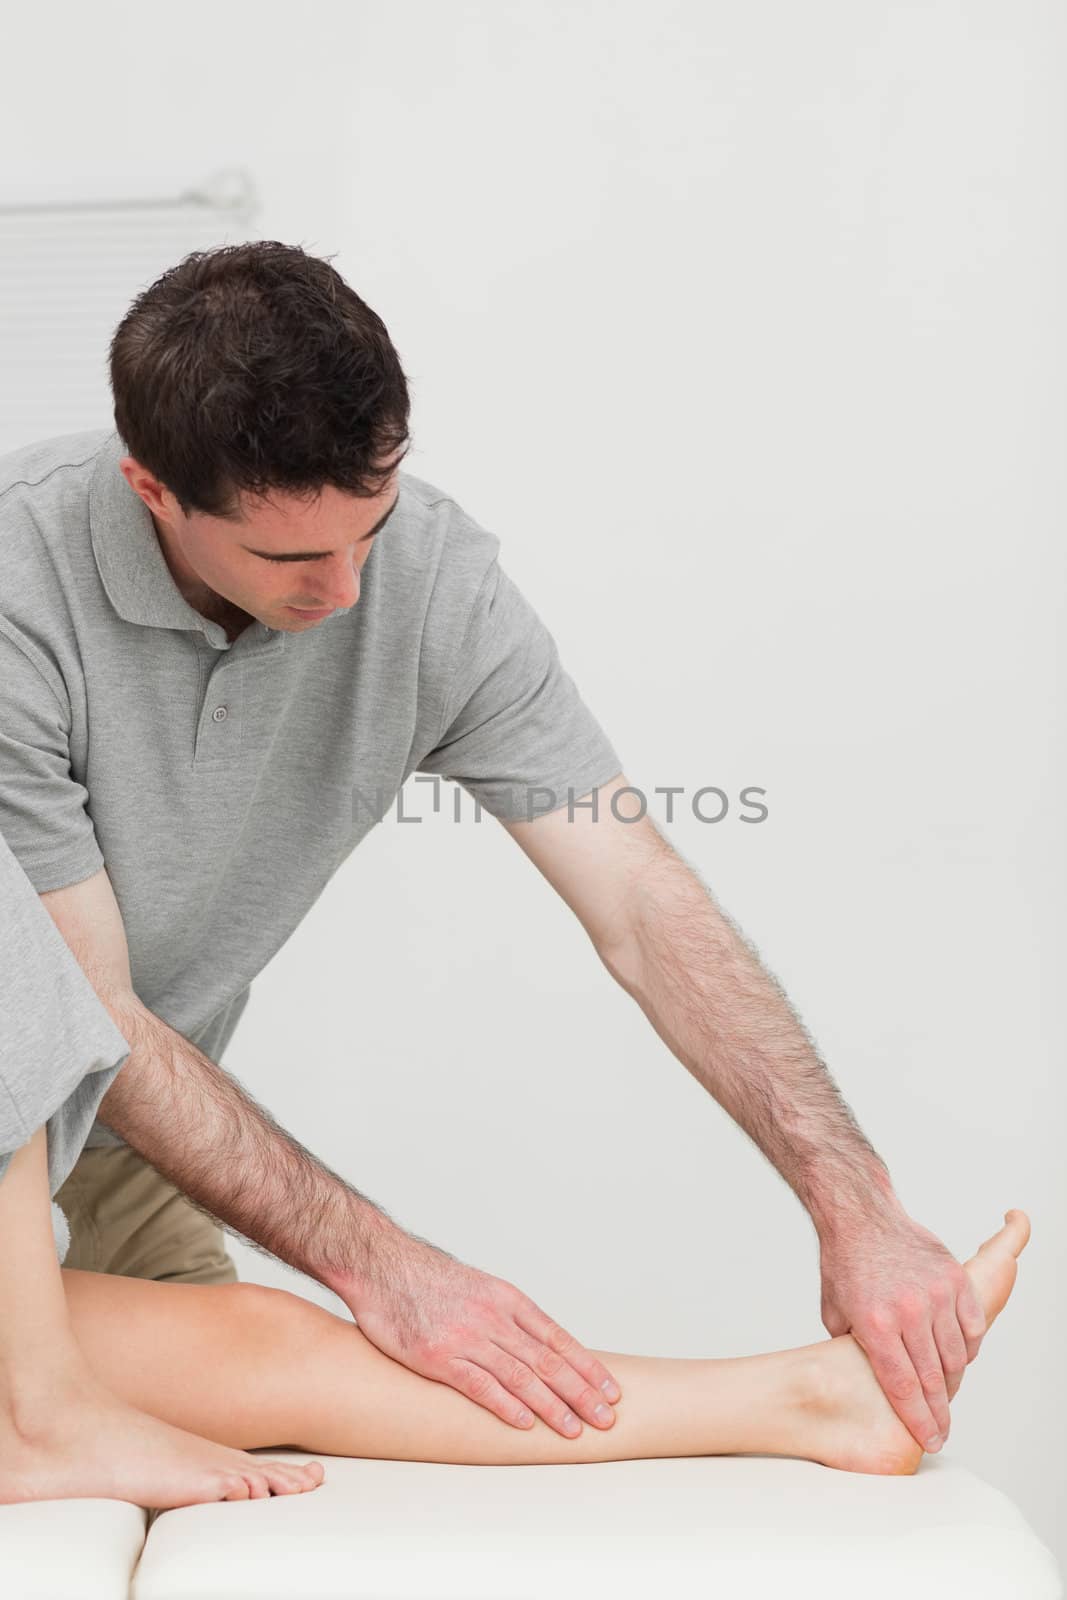 Serious physiotherapist working on the calf of a patient in a room